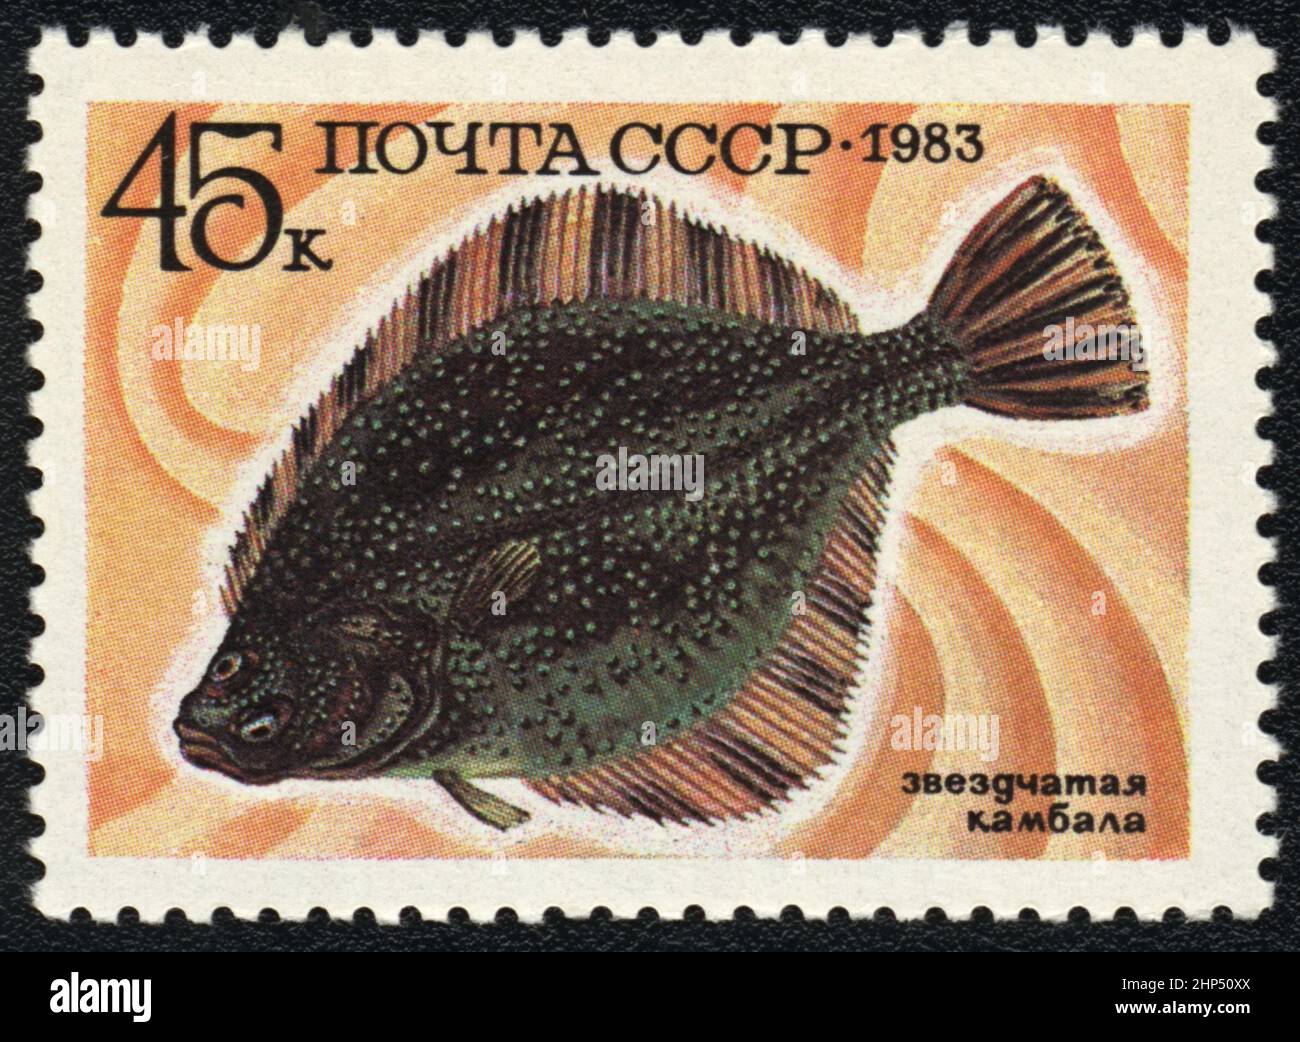 A postage stamp with image of Flatfish Starry flounder (Platichthys stellatus), USSR, 1983 Stock Photo